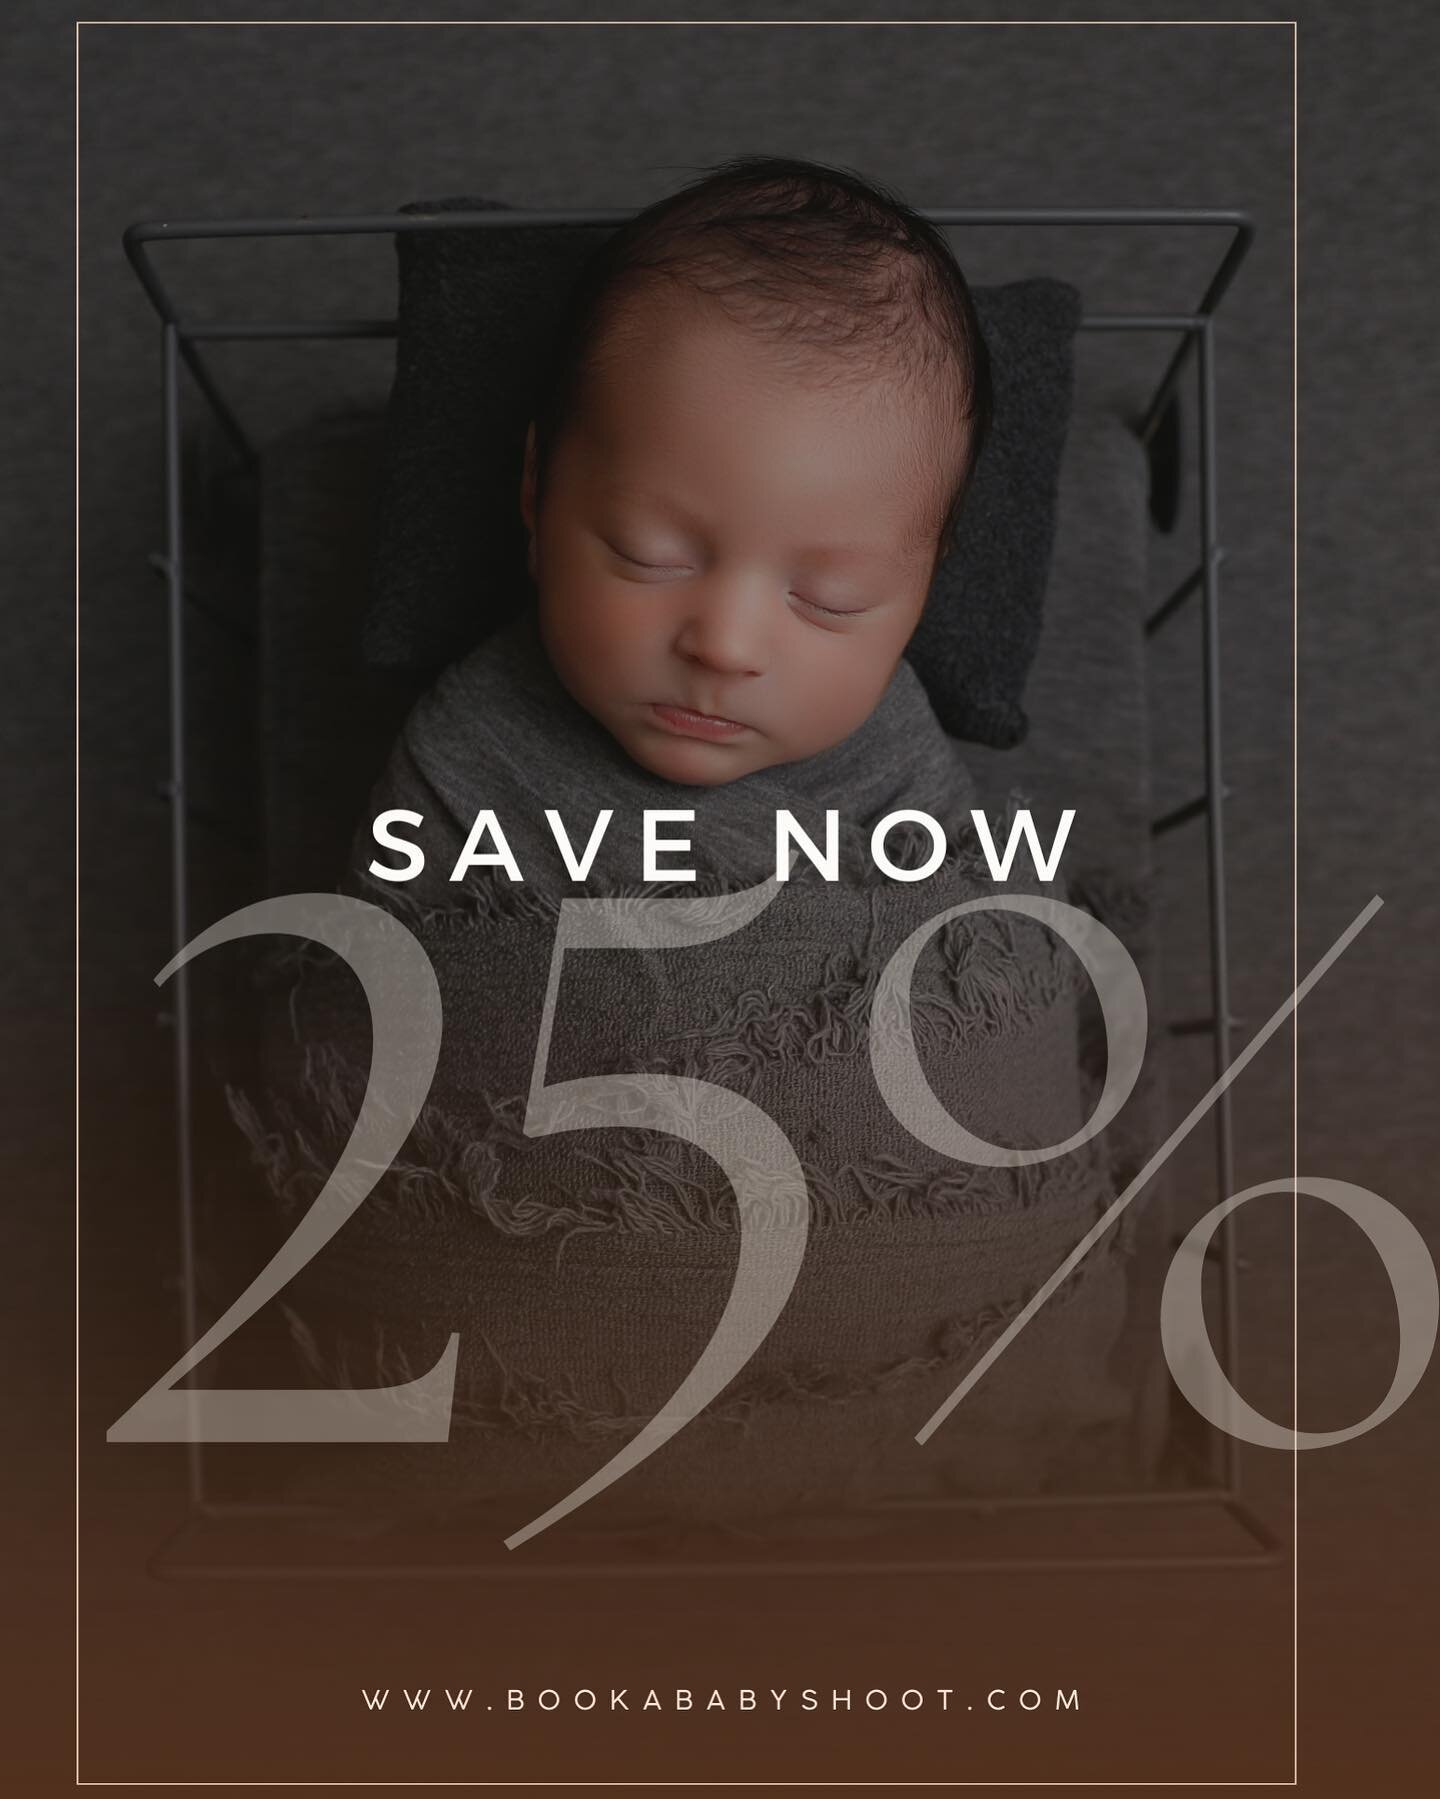 Spring promos start now - take 25% off in home newborn sessions for Orange and LA Counties in California.
www.bookbabyshoot.com
 -code springbaby25
www.anabrandt.com for sessions with me!

We have photographers in 12 states and will be opening up boo